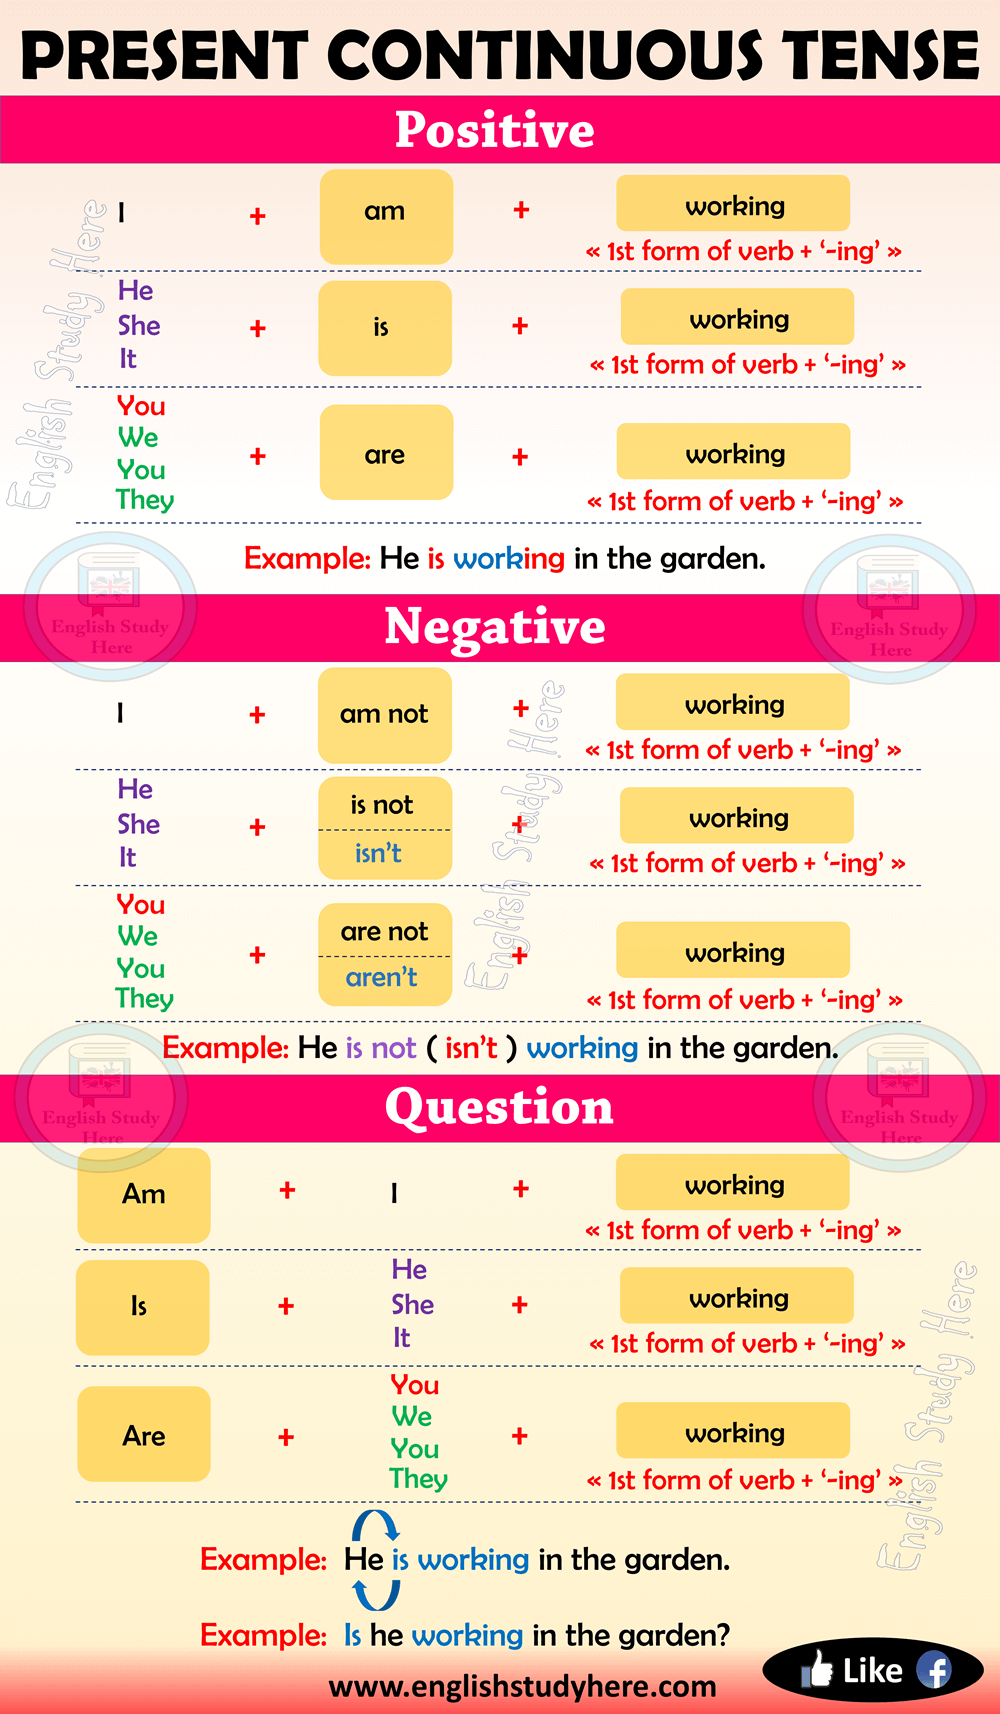 present-continuous-tense-in-english-english-study-here